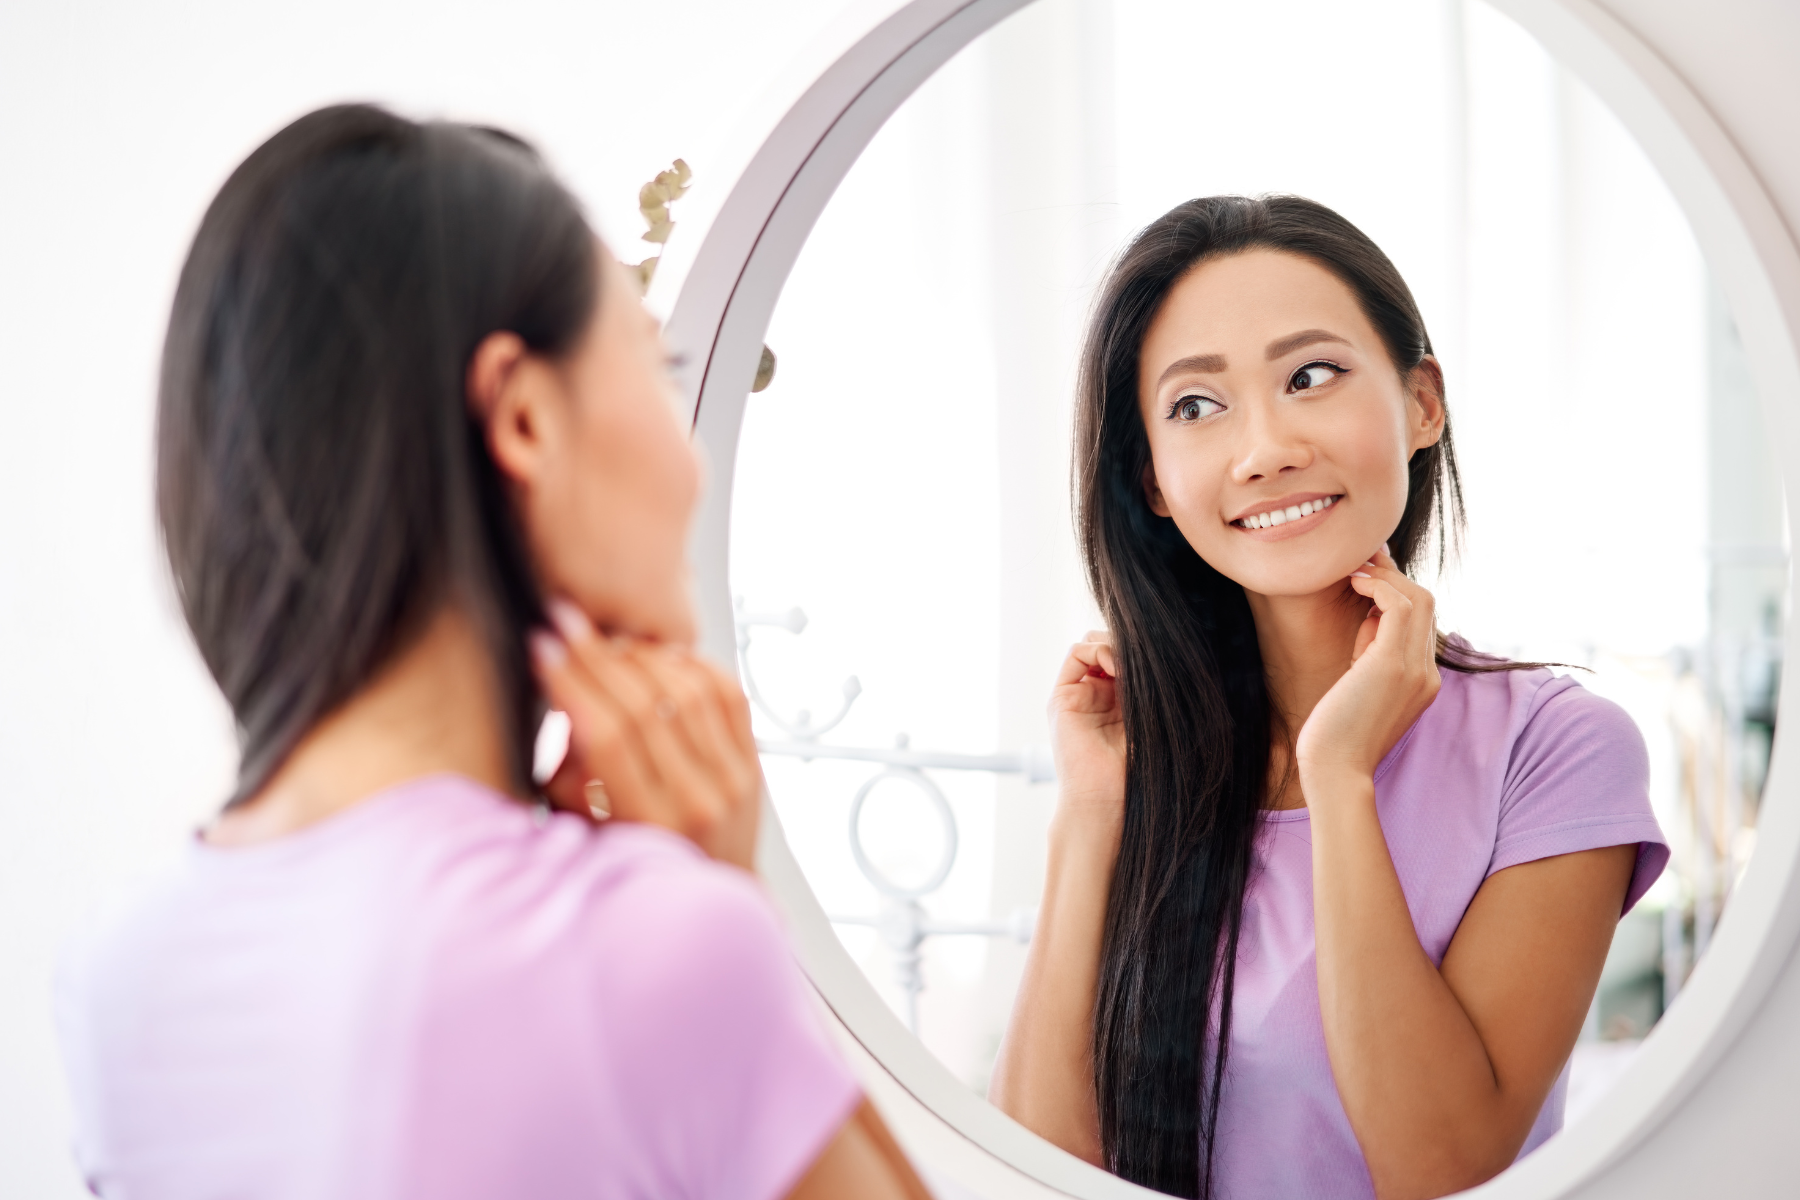 Woman looking at herself in a mirror on a vanity, smiling.